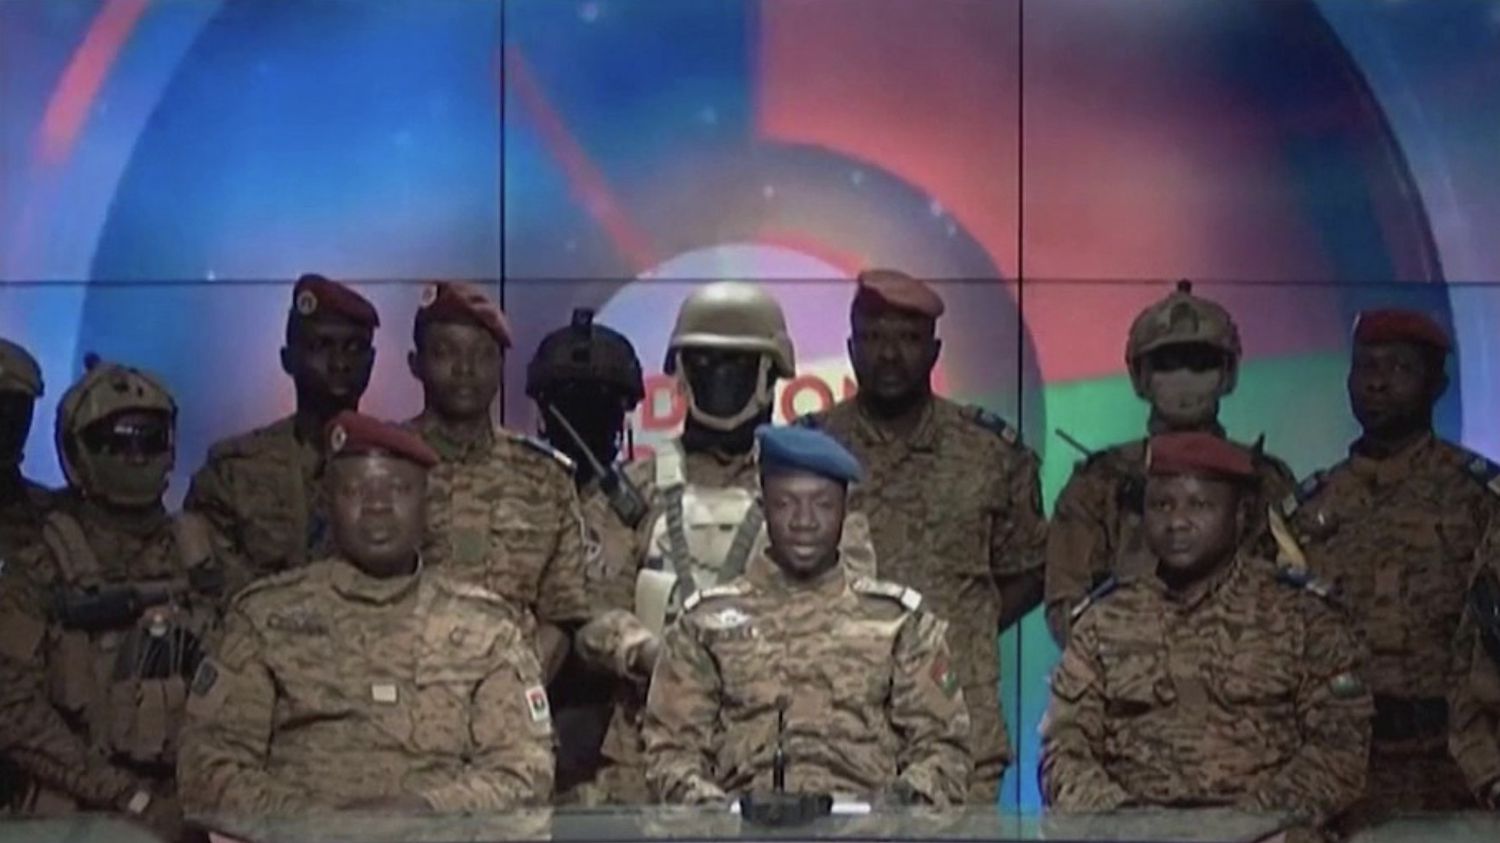 Burkina Faso soldiers announce take over of government, January 24, 2022. Image from Blaze Trends.